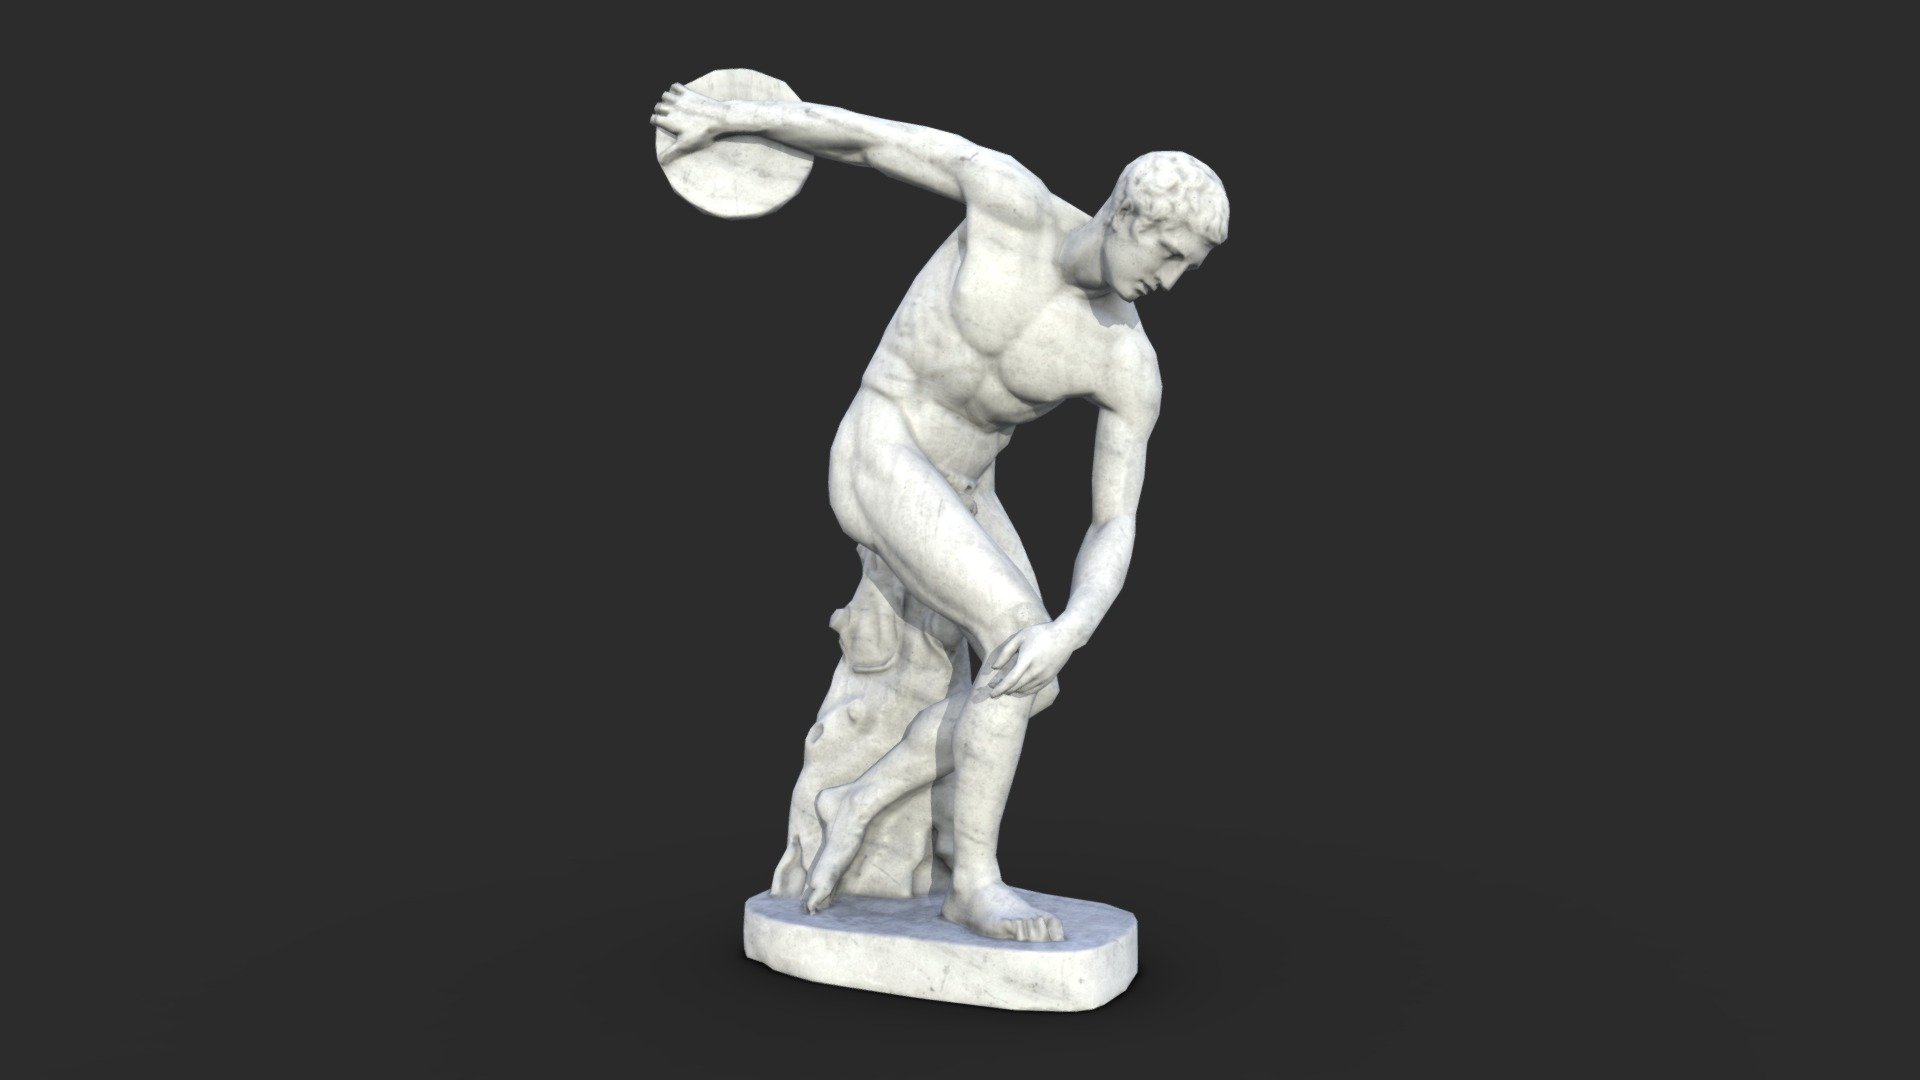 This Discobolus Antique Statue in granite material includes 5 LODs and a collider set. 

The asset is available in realistic style and can be used in any game (post-apo, first person shooter, GTA like, historical… ). All objects share a unique material for the best optimization for games.

This AAA game asset of an vintage sculpture will embellish you scene and add more details which can help the gameplay and the game-design or level-design.

All textures are PBR ready and available in 4K.

Low-poly model &amp; Blender native 3.3

SPECIFICATIONS


Objects : 1
Polygons : 3744
Render engine : Eevee (Cycles ready)

GAME SPECS


LODs : Yes (inside FBX for Unity &amp; Unreal)
Numbers of LODs : 5
Collider : Yes

EXPORTED FORMATS


FBX
Collada
OBJ

TEXTURES


Materials in scene : 1
Textures sizes : 4K
Textures types : Base Color, Metallic, Roughness, Normal (DirectX &amp; OpenGL), Heigh, AO (also Unity &amp; Unreal ARM workflow maps)
Textures format : PNG
 - Discobolus Statue - Granite - Buy Royalty Free 3D model by KangaroOz 3D (@KangaroOz-3D) 3d model